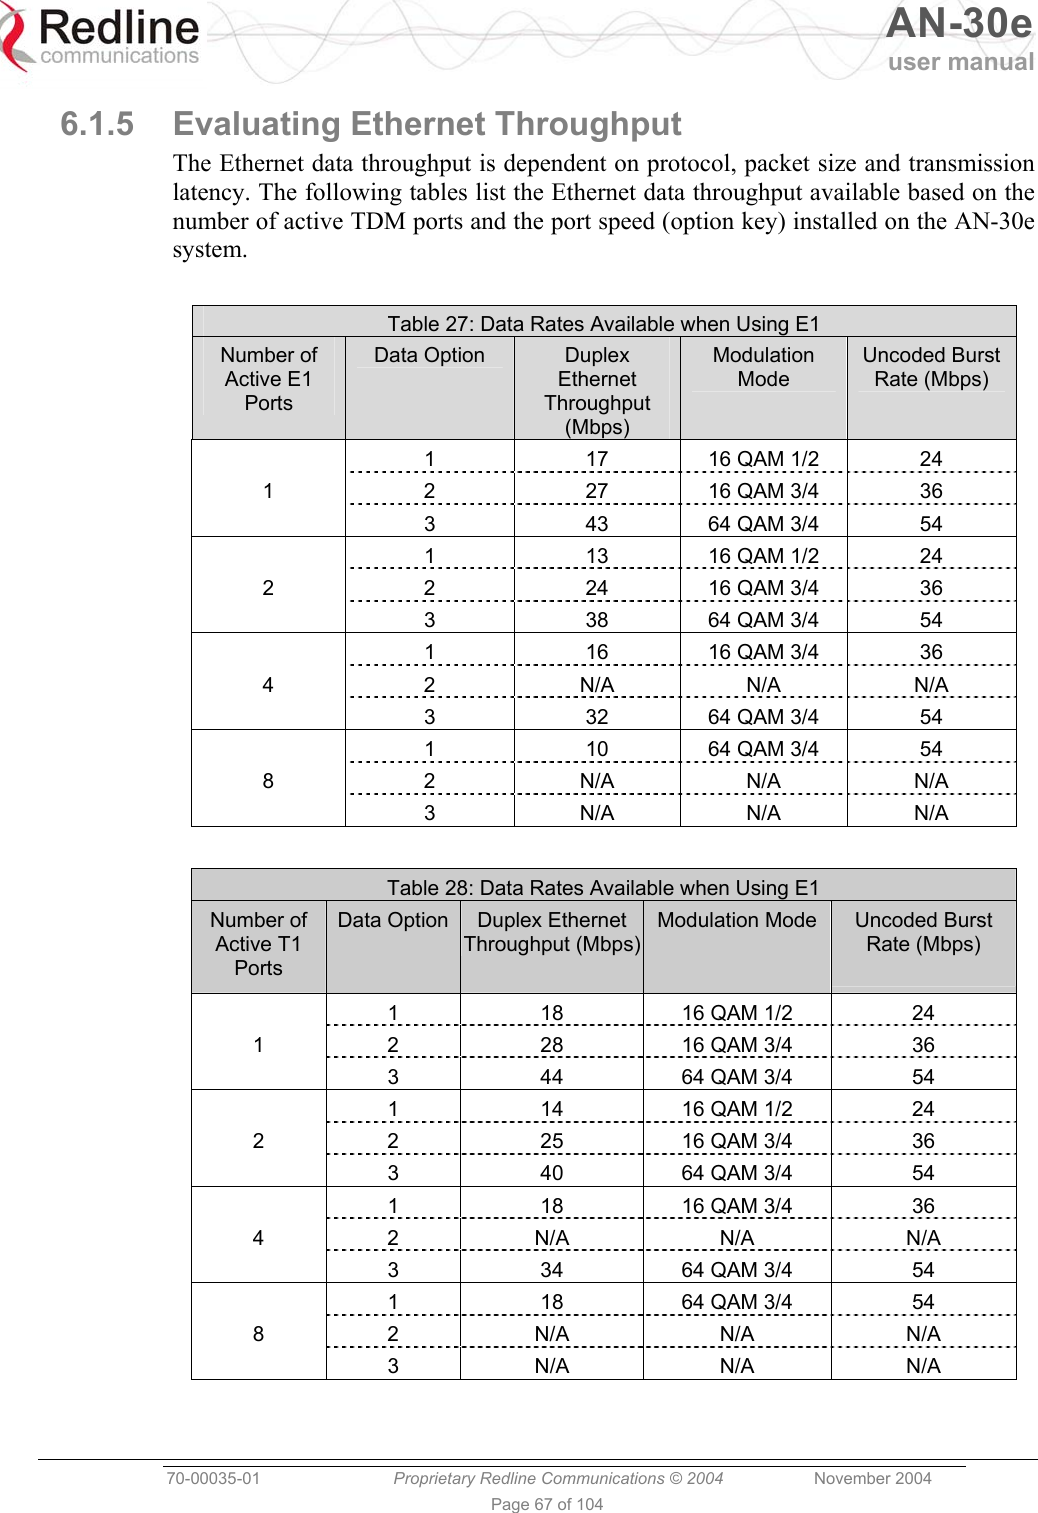   AN-30e user manual  70-00035-01  Proprietary Redline Communications © 2004 November 2004   Page 67 of 104 6.1.5  Evaluating Ethernet Throughput The Ethernet data throughput is dependent on protocol, packet size and transmission latency. The following tables list the Ethernet data throughput available based on the number of active TDM ports and the port speed (option key) installed on the AN-30e system.   Table 27: Data Rates Available when Using E1 Number of Active E1 Ports Data Option  Duplex Ethernet Throughput (Mbps) Modulation Mode Uncoded Burst Rate (Mbps)  1  17  16 QAM 1/2  24 1  2  27  16 QAM 3/4  36   3  43  64 QAM 3/4  54   1  13  16 QAM 1/2  24 2  2  24  16 QAM 3/4  36   3  38  64 QAM 3/4  54   1  16  16 QAM 3/4  36 4 2 N/A N/A N/A   3  32  64 QAM 3/4  54   1  10  64 QAM 3/4  54 8 2 N/A N/A N/A  3 N/A N/A N/A  Table 28: Data Rates Available when Using E1 Number of Active T1 Ports Data Option   Duplex Ethernet Throughput (Mbps)Modulation Mode   Uncoded Burst Rate (Mbps)    1  18  16 QAM 1/2  24 1  2  28  16 QAM 3/4  36   3  44  64 QAM 3/4  54   1  14  16 QAM 1/2  24 2  2  25  16 QAM 3/4  36   3  40  64 QAM 3/4  54   1  18  16 QAM 3/4  36 4 2  N/A  N/A  N/A   3  34  64 QAM 3/4  54   1  18  64 QAM 3/4  54 8 2  N/A  N/A  N/A  3  N/A  N/A  N/A  